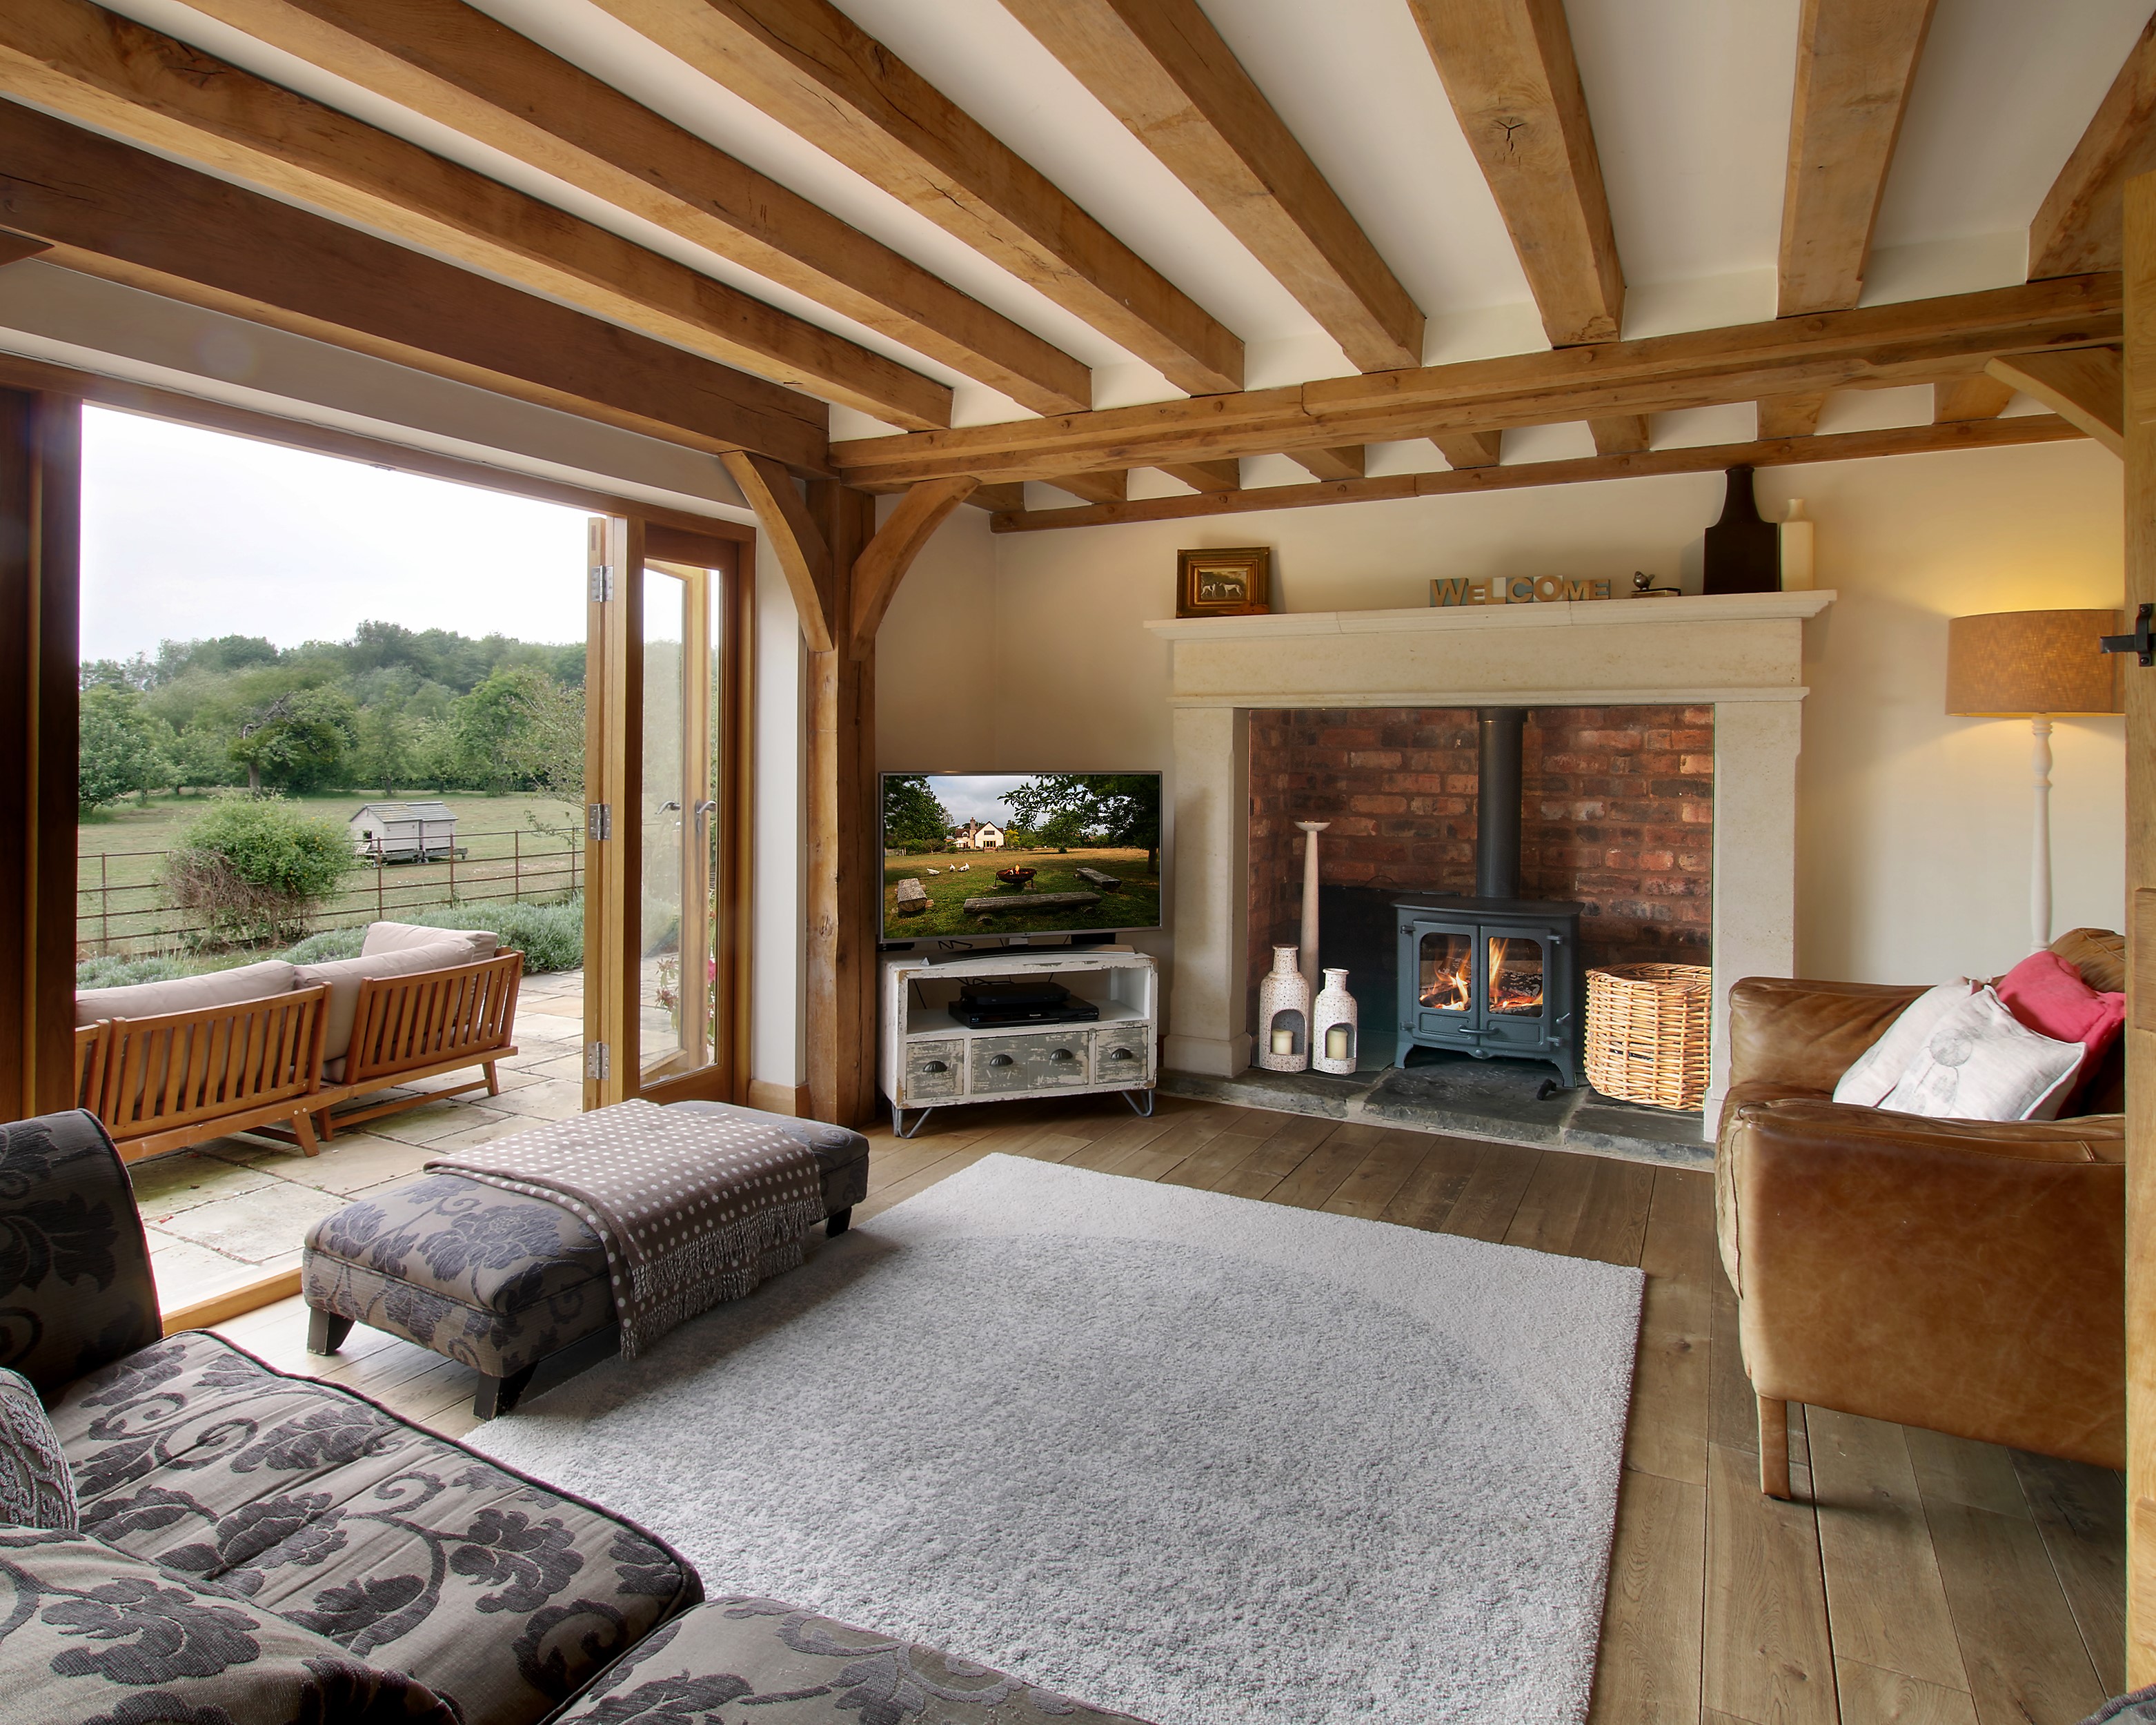 Living room with countryside views